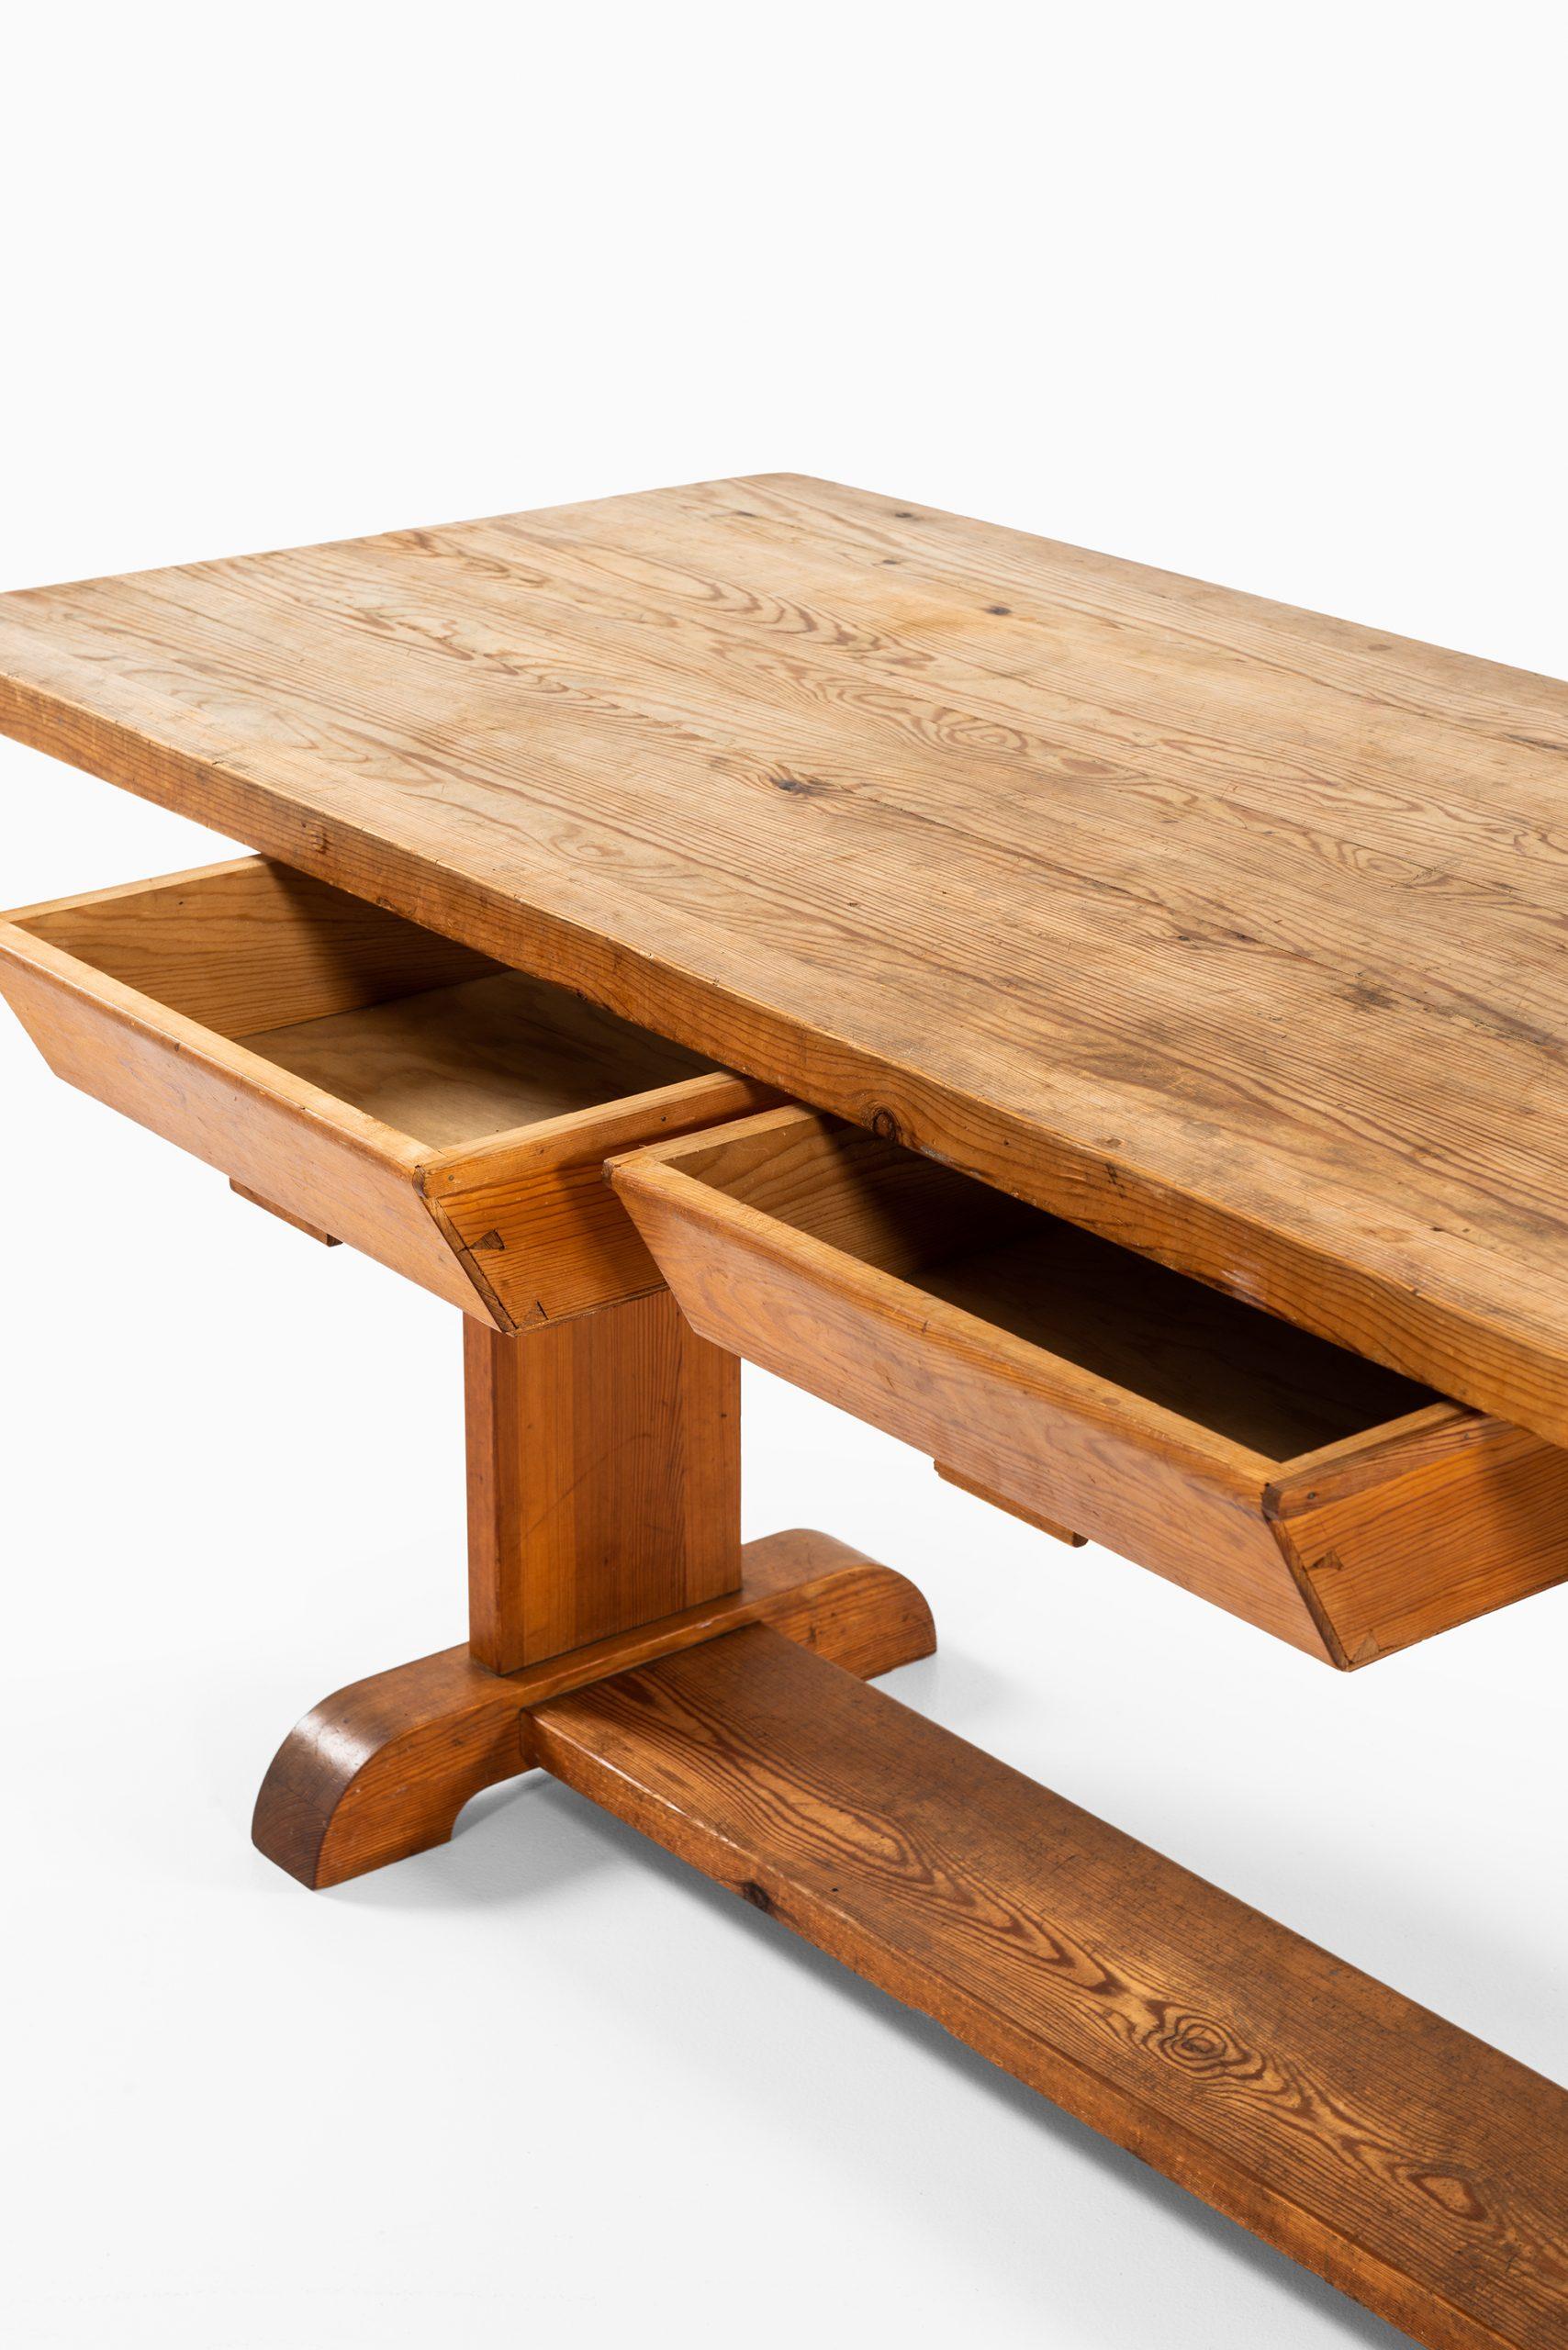 Mid-20th Century Desk / Dining Table Produced in Sweden